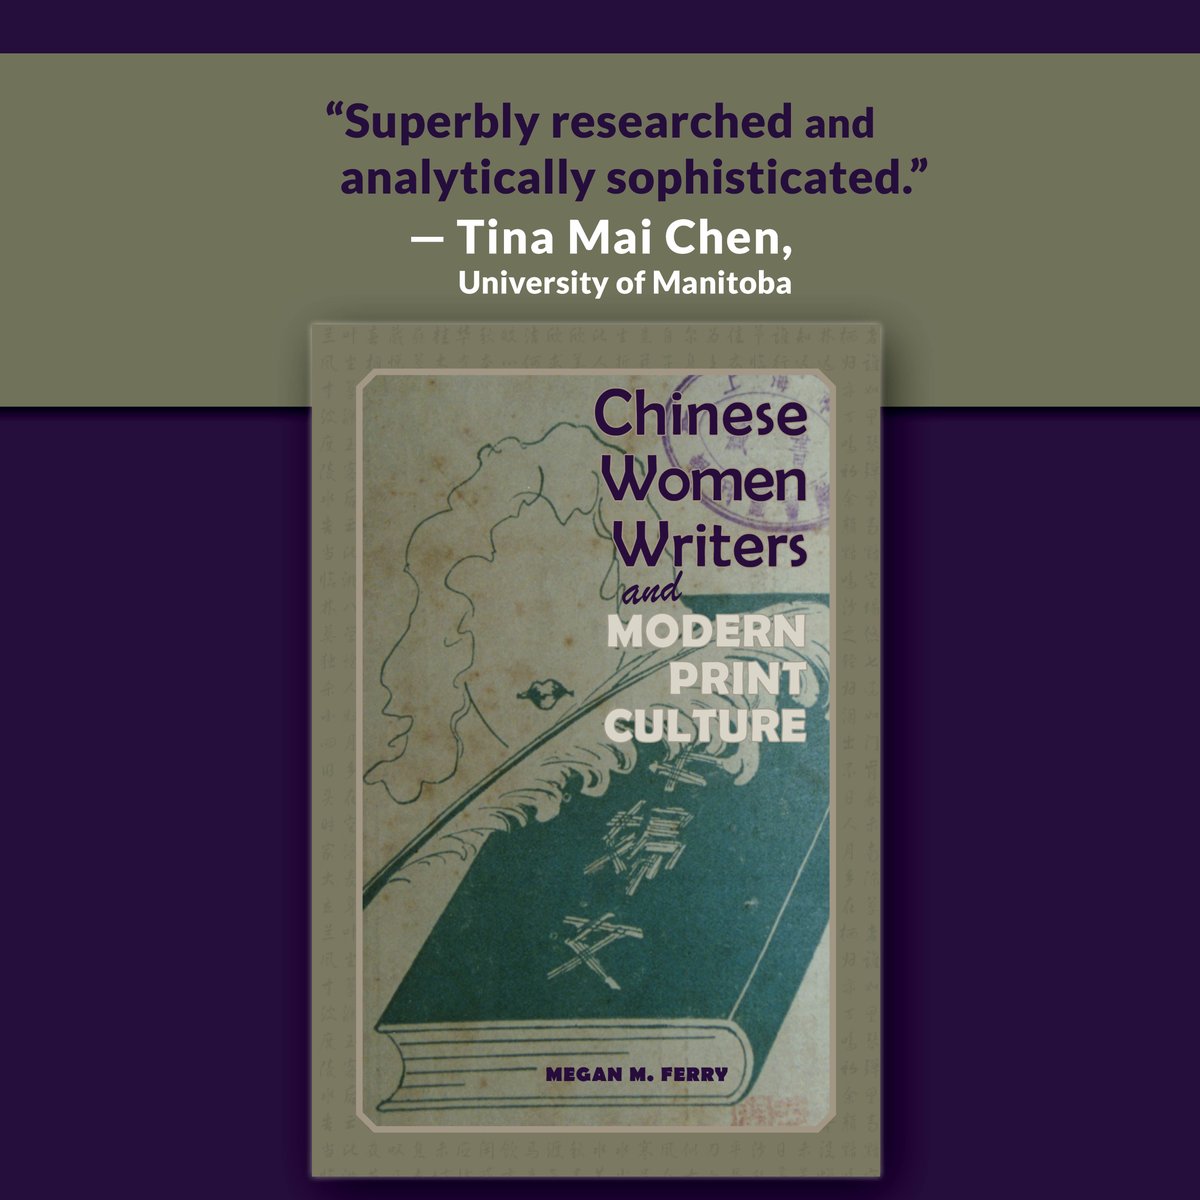 'This superbly researched & analytically sophisticated book marks an important intervention into studies of women’s subjectivity in 20th-century China, as well as for literary & media studies more generally.' —Tina Mai Chen, University of Manitoba ow.ly/gtgz50RqbZM